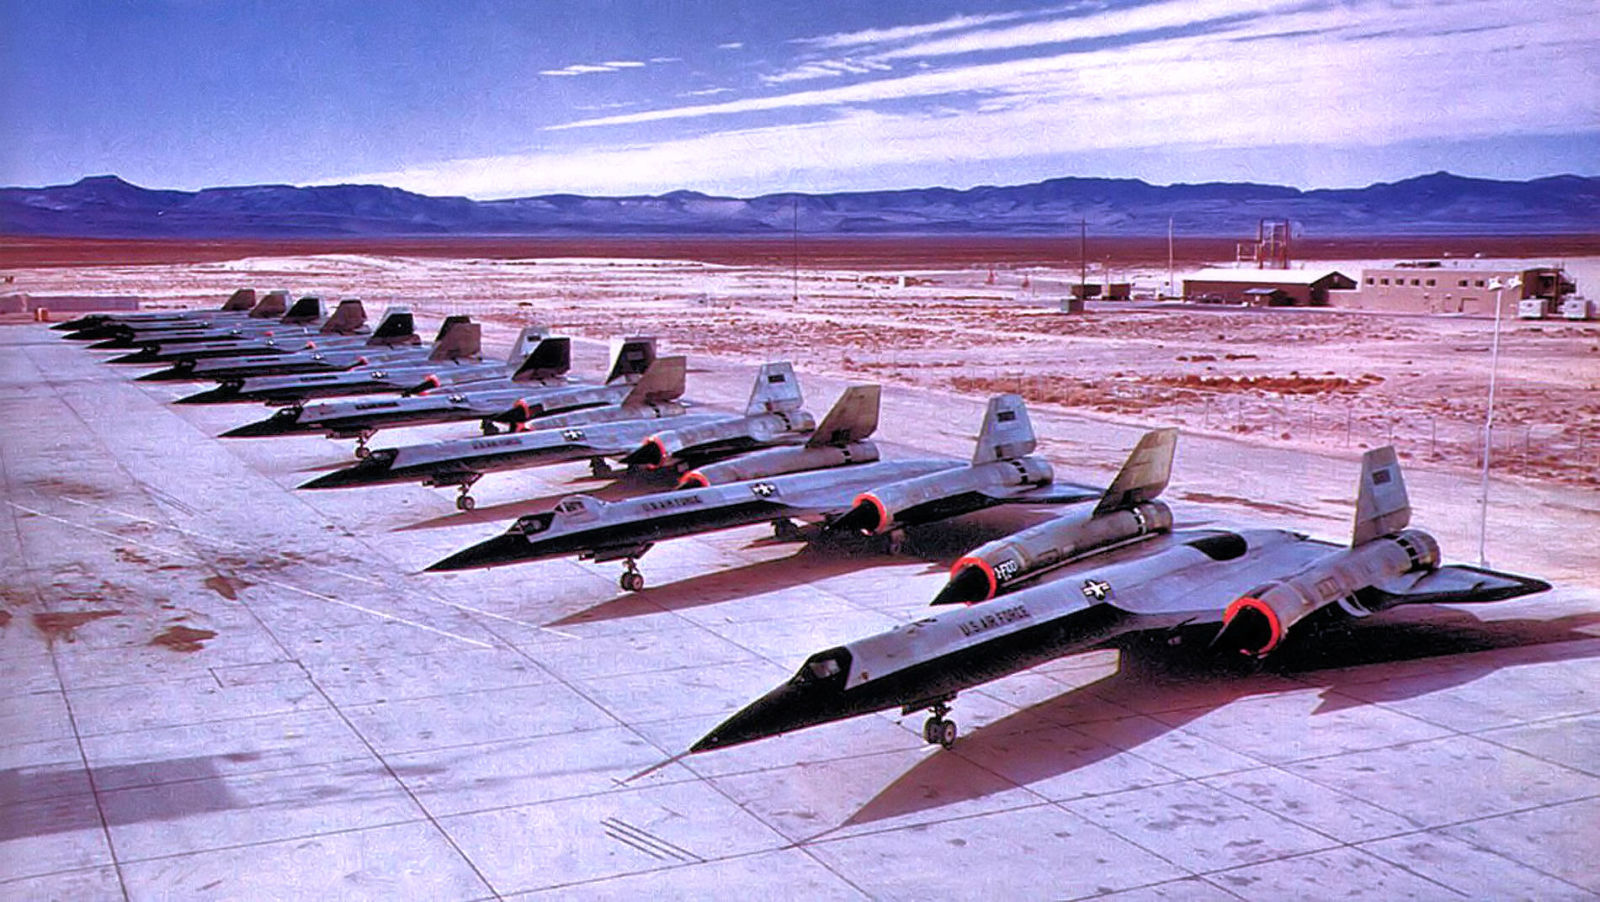 Lockheed A-12s lined up outside the Lockheed’s Palmdale, California facility. The A-12 served as the basis for the SR-71. (US Air Force)